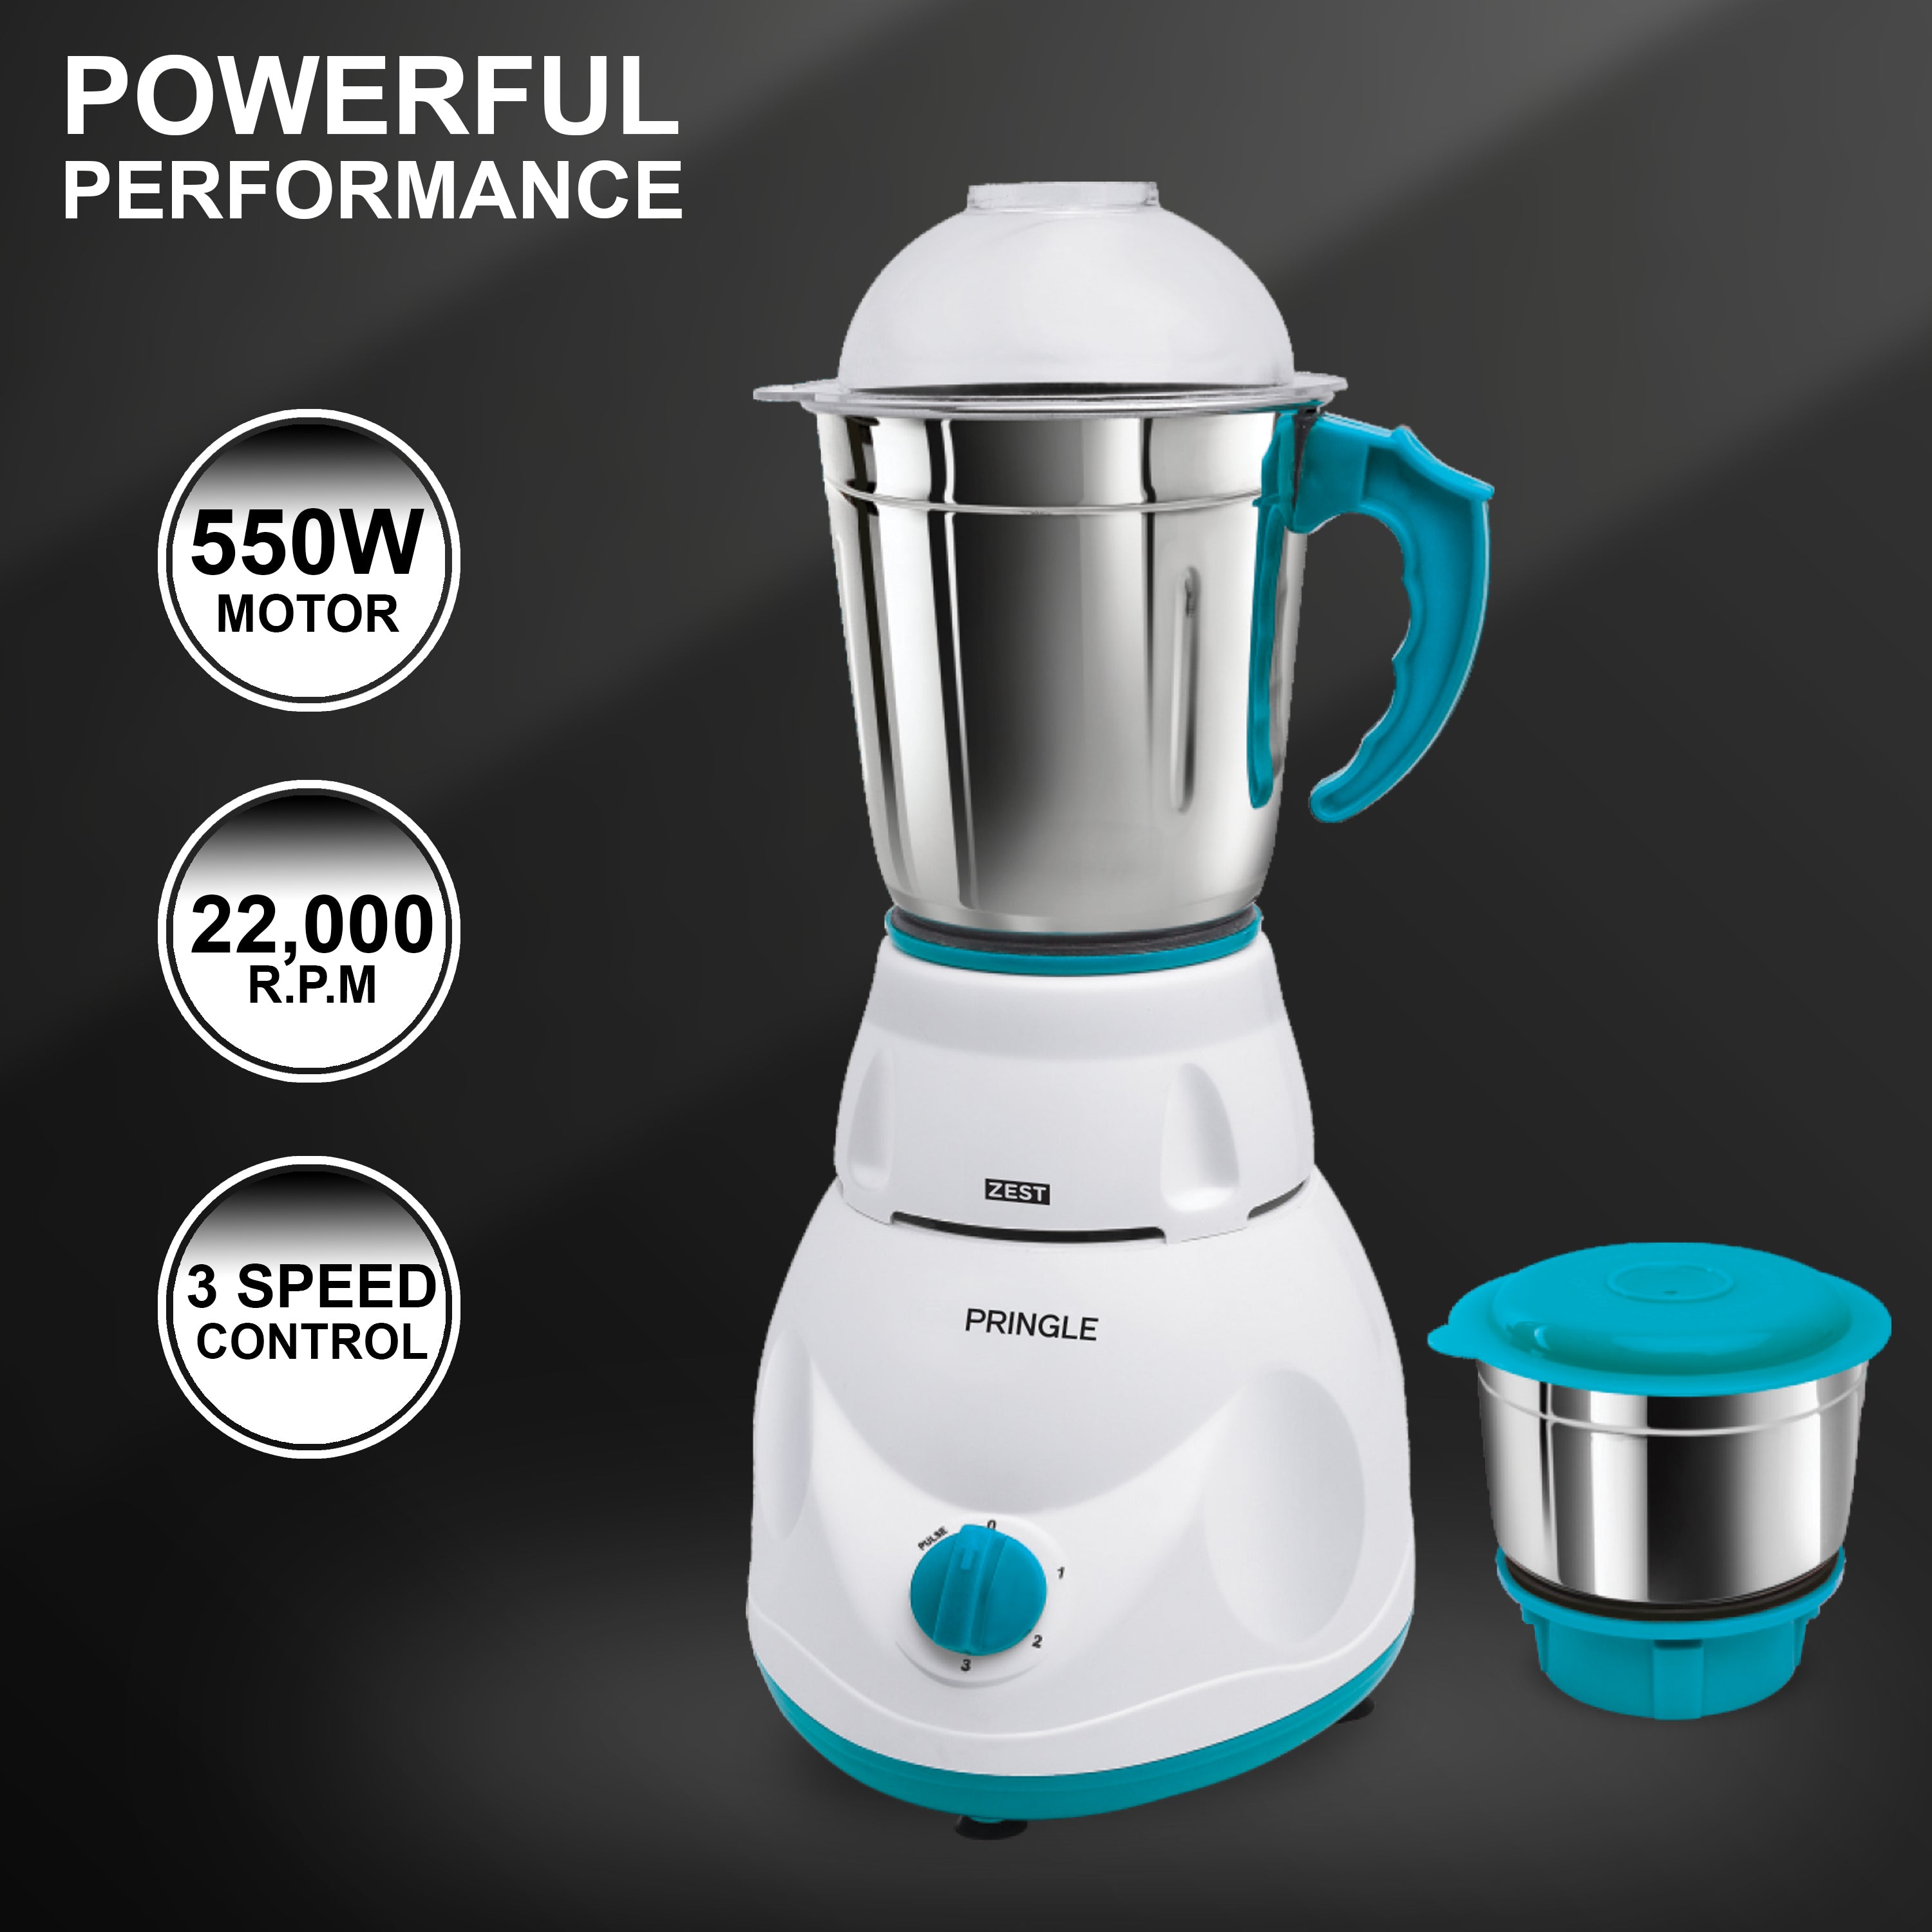 Pringle 550Watt Mixer Grinder with 2 Leak Proof Stainless Steel Jars| 30 Min Motor Rating| Robust Nylon Coupler | Overload Protection| ISI Certified| 2 Year Warranty - Pringle Appliances